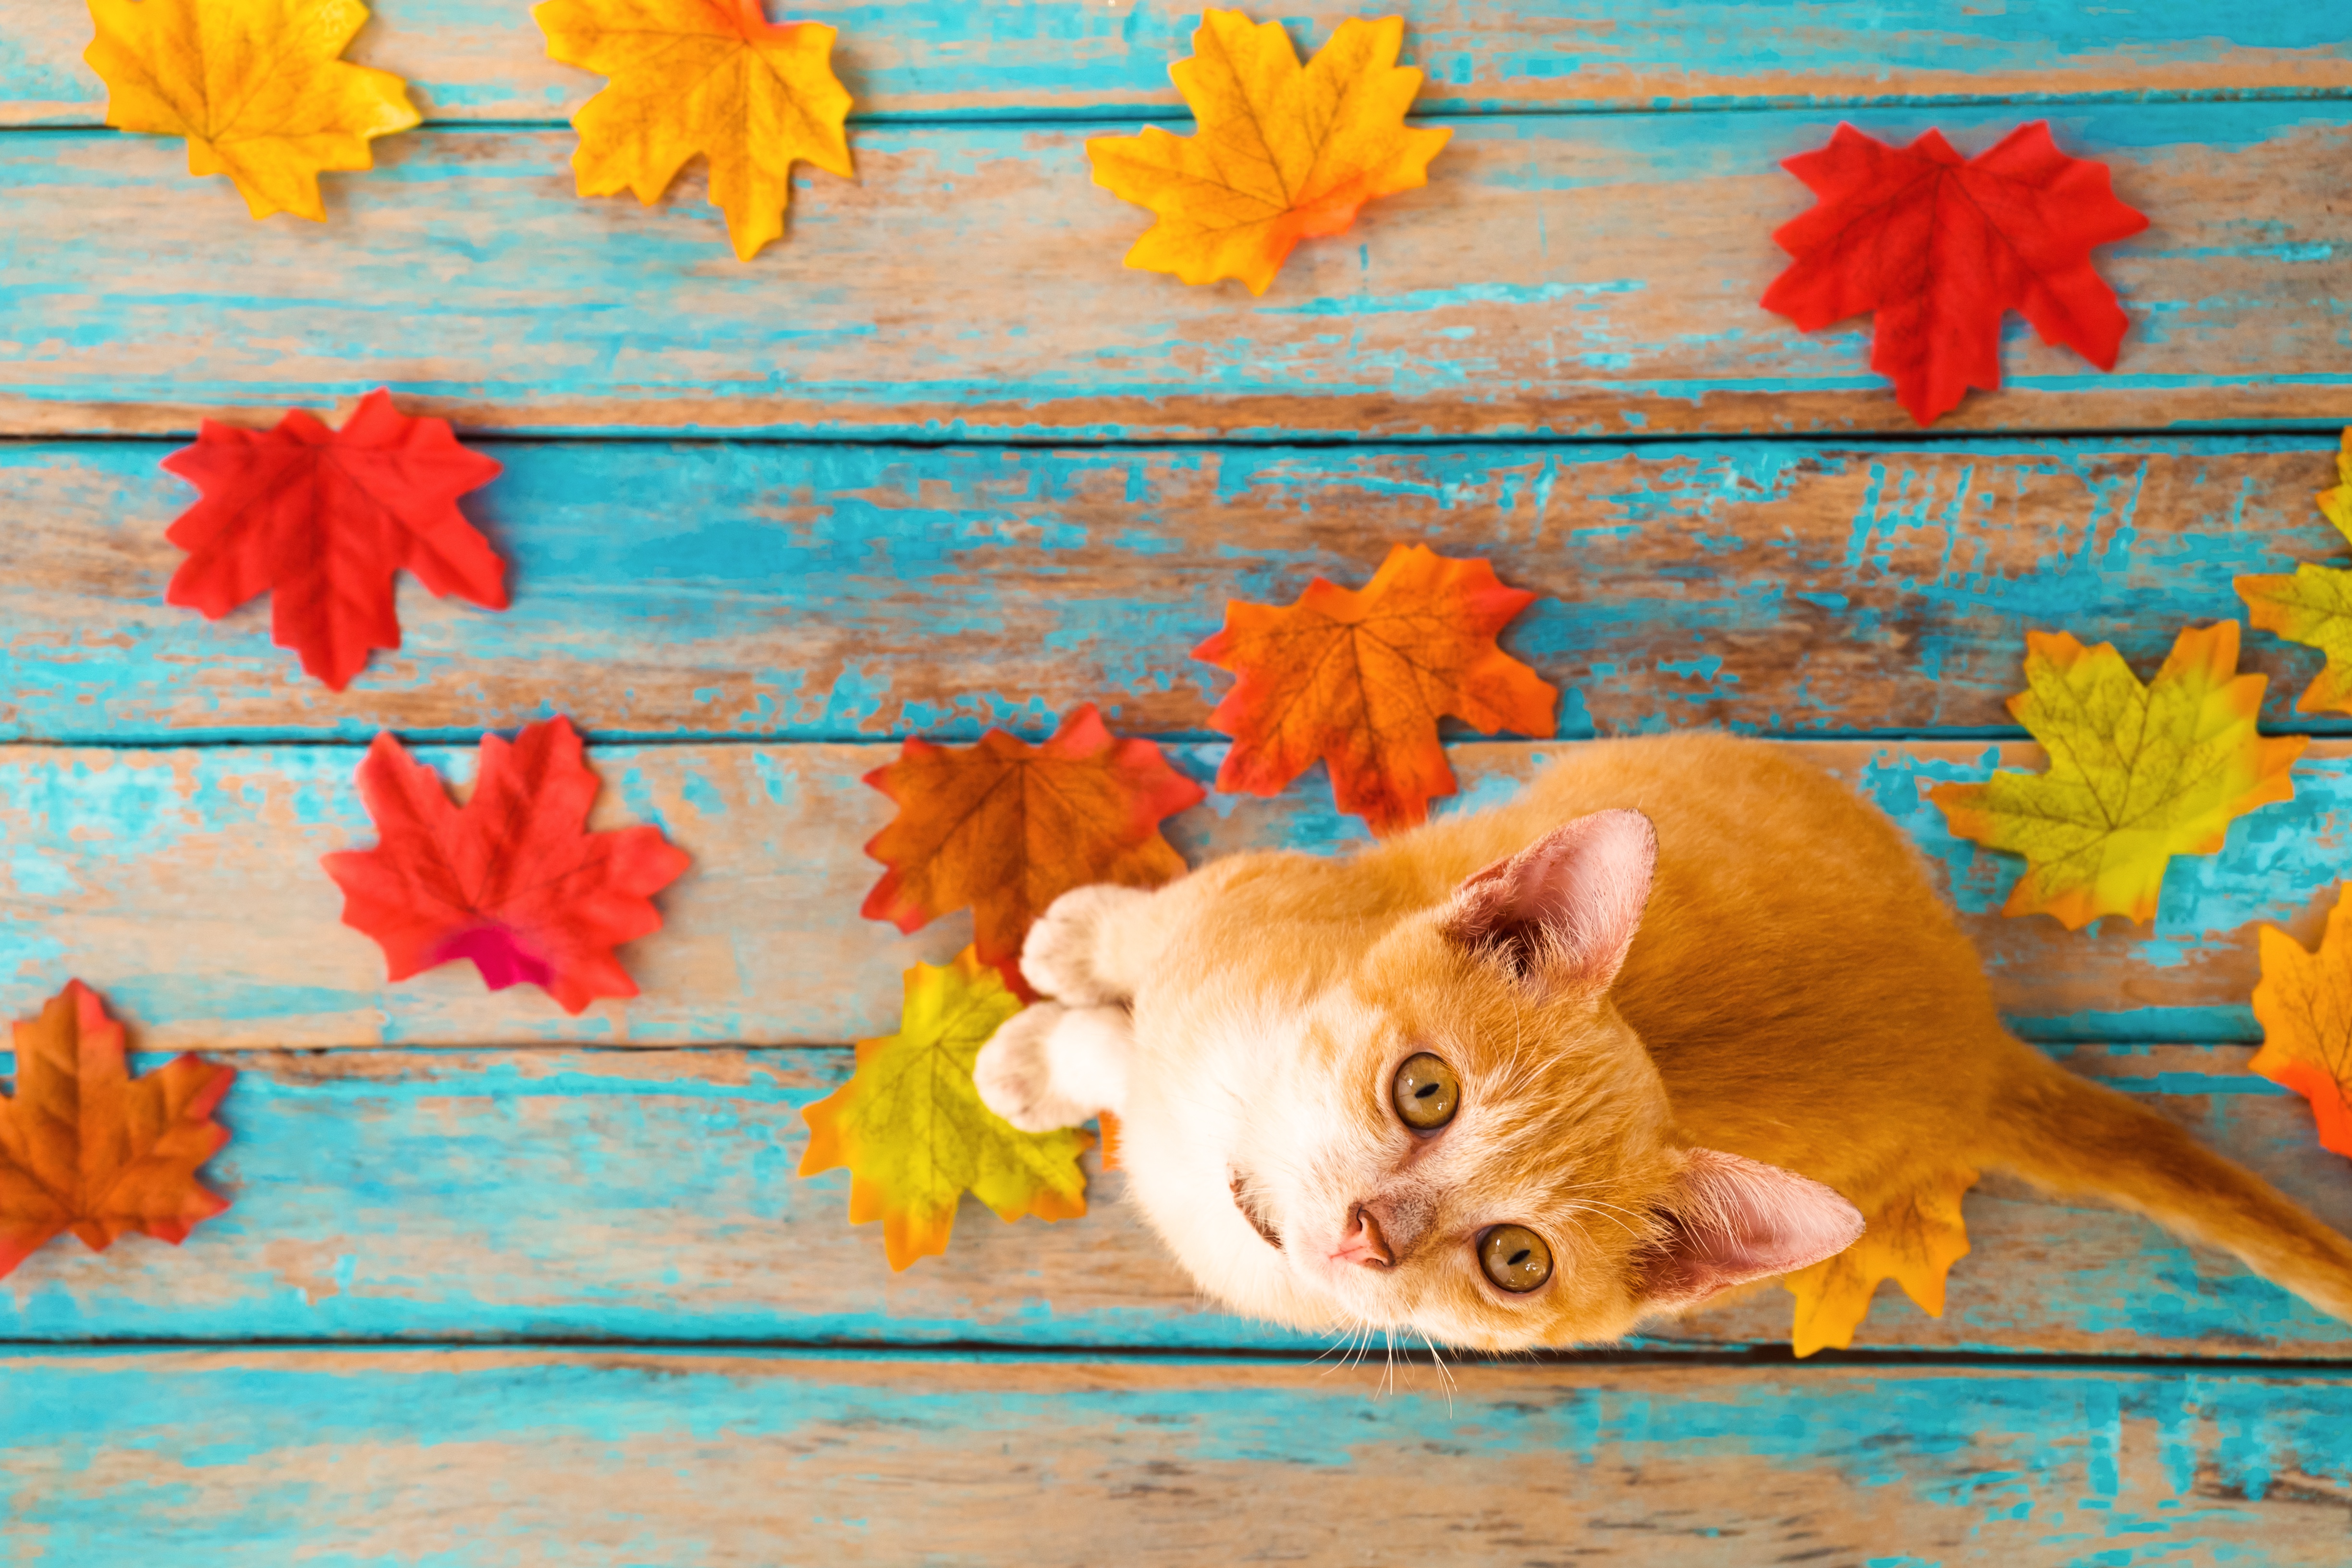 Animals Cats Pet Top View Fallen Leaves Wooden Surface Leaves Colorful Wood Planks 4896x3264